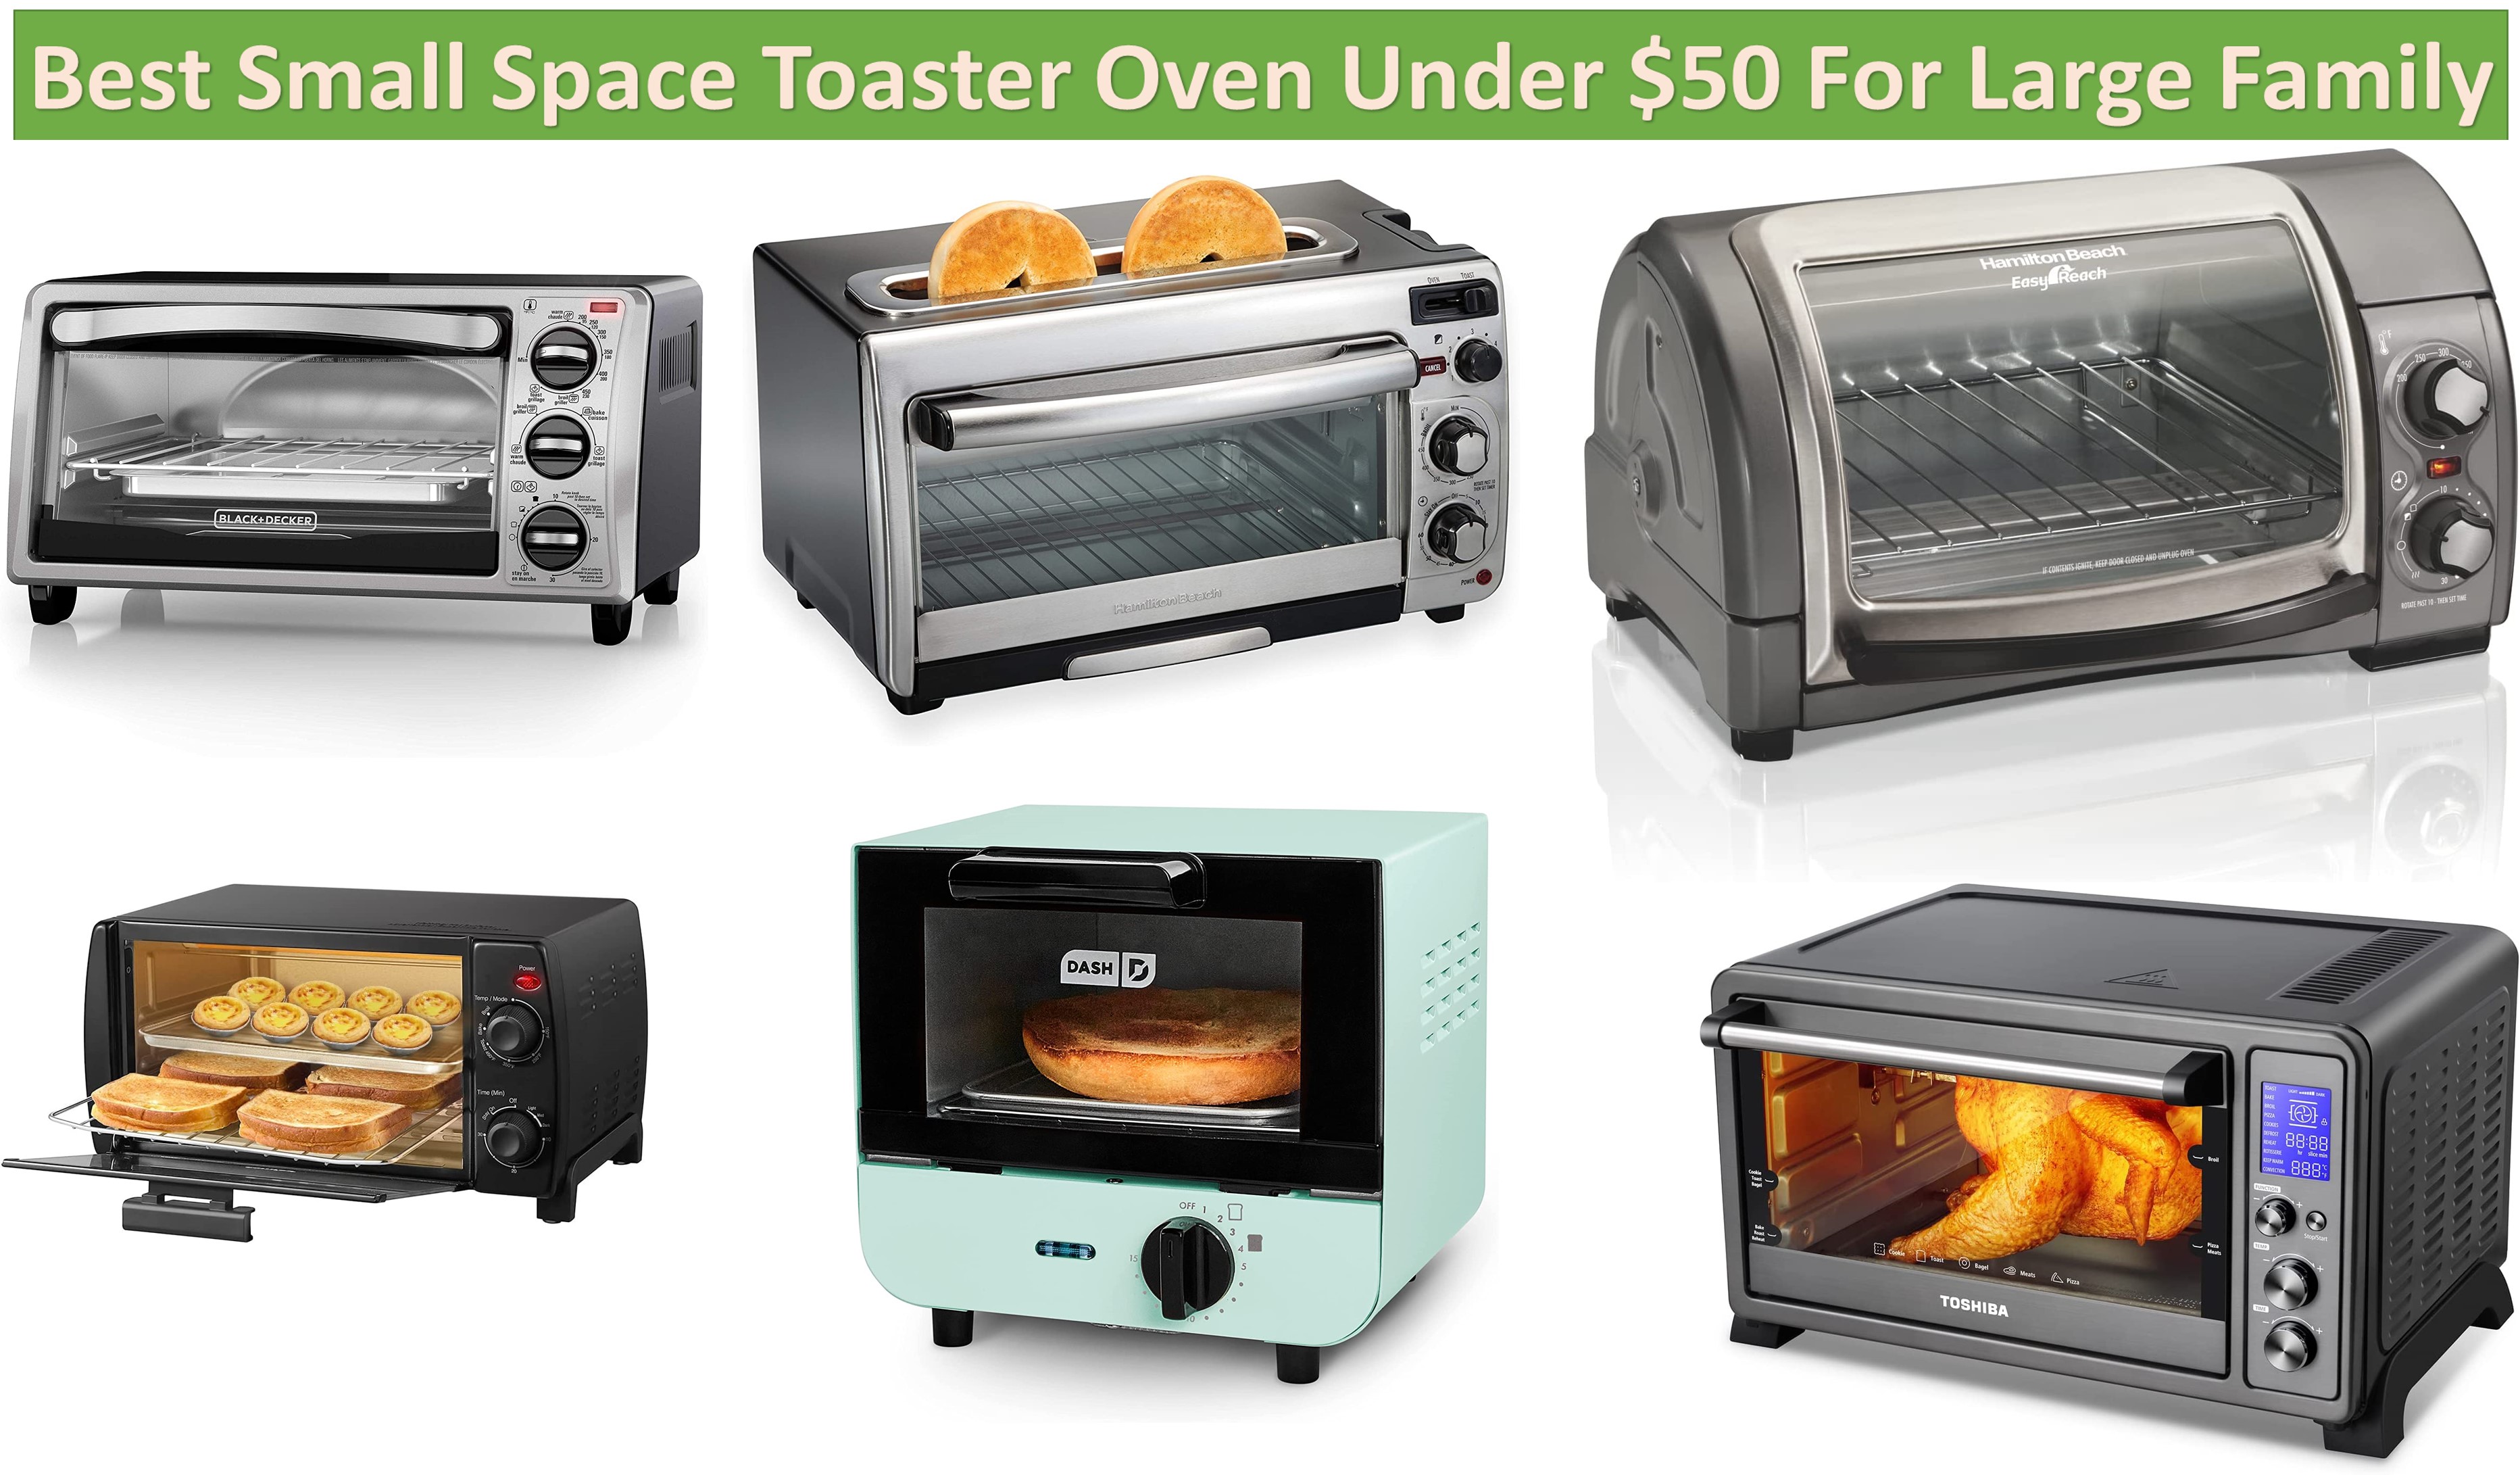 Best Small Space Toaster Oven Under $50 For Large Family